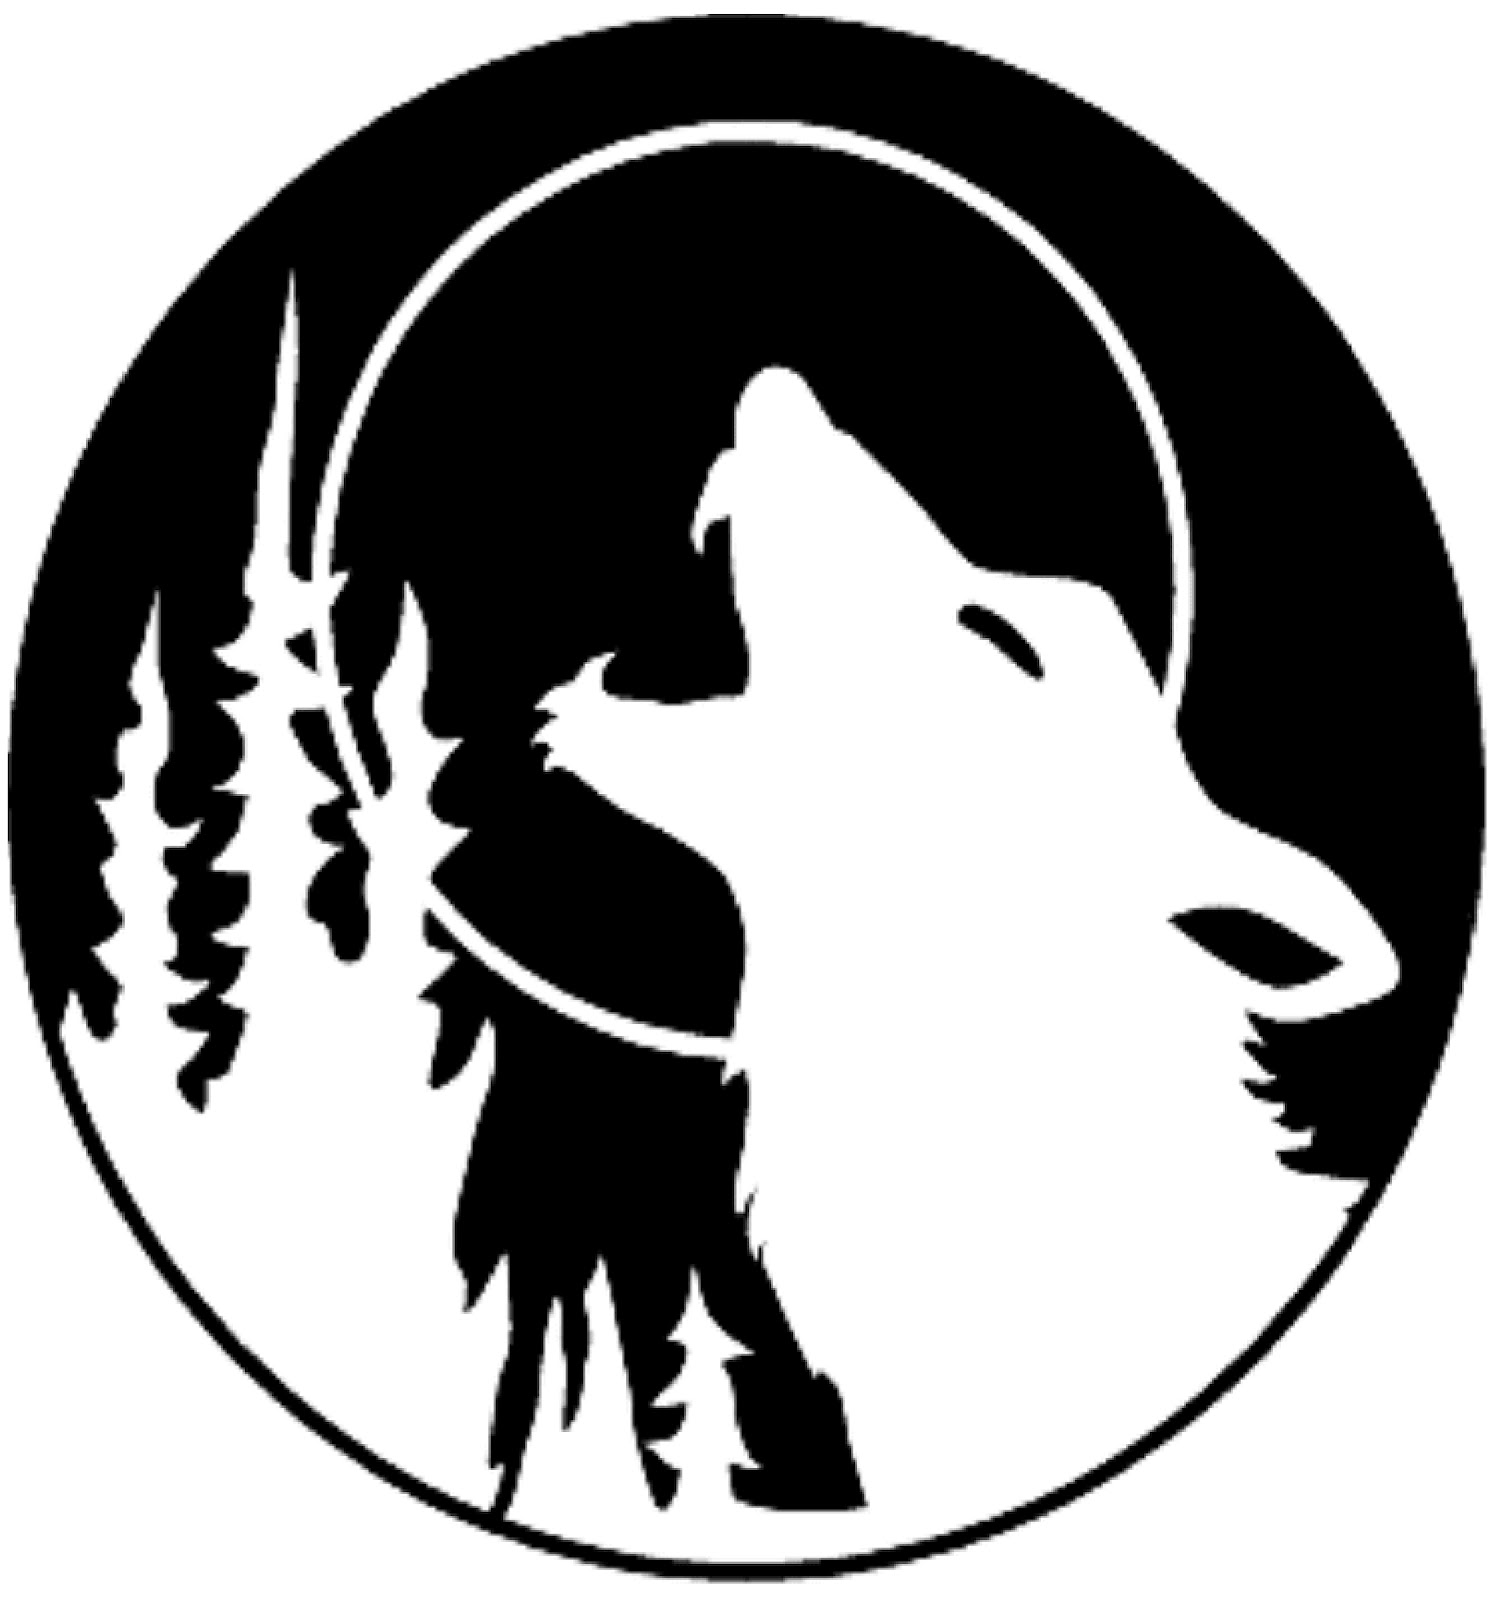 Howling Wolf Outline Cliparts.co